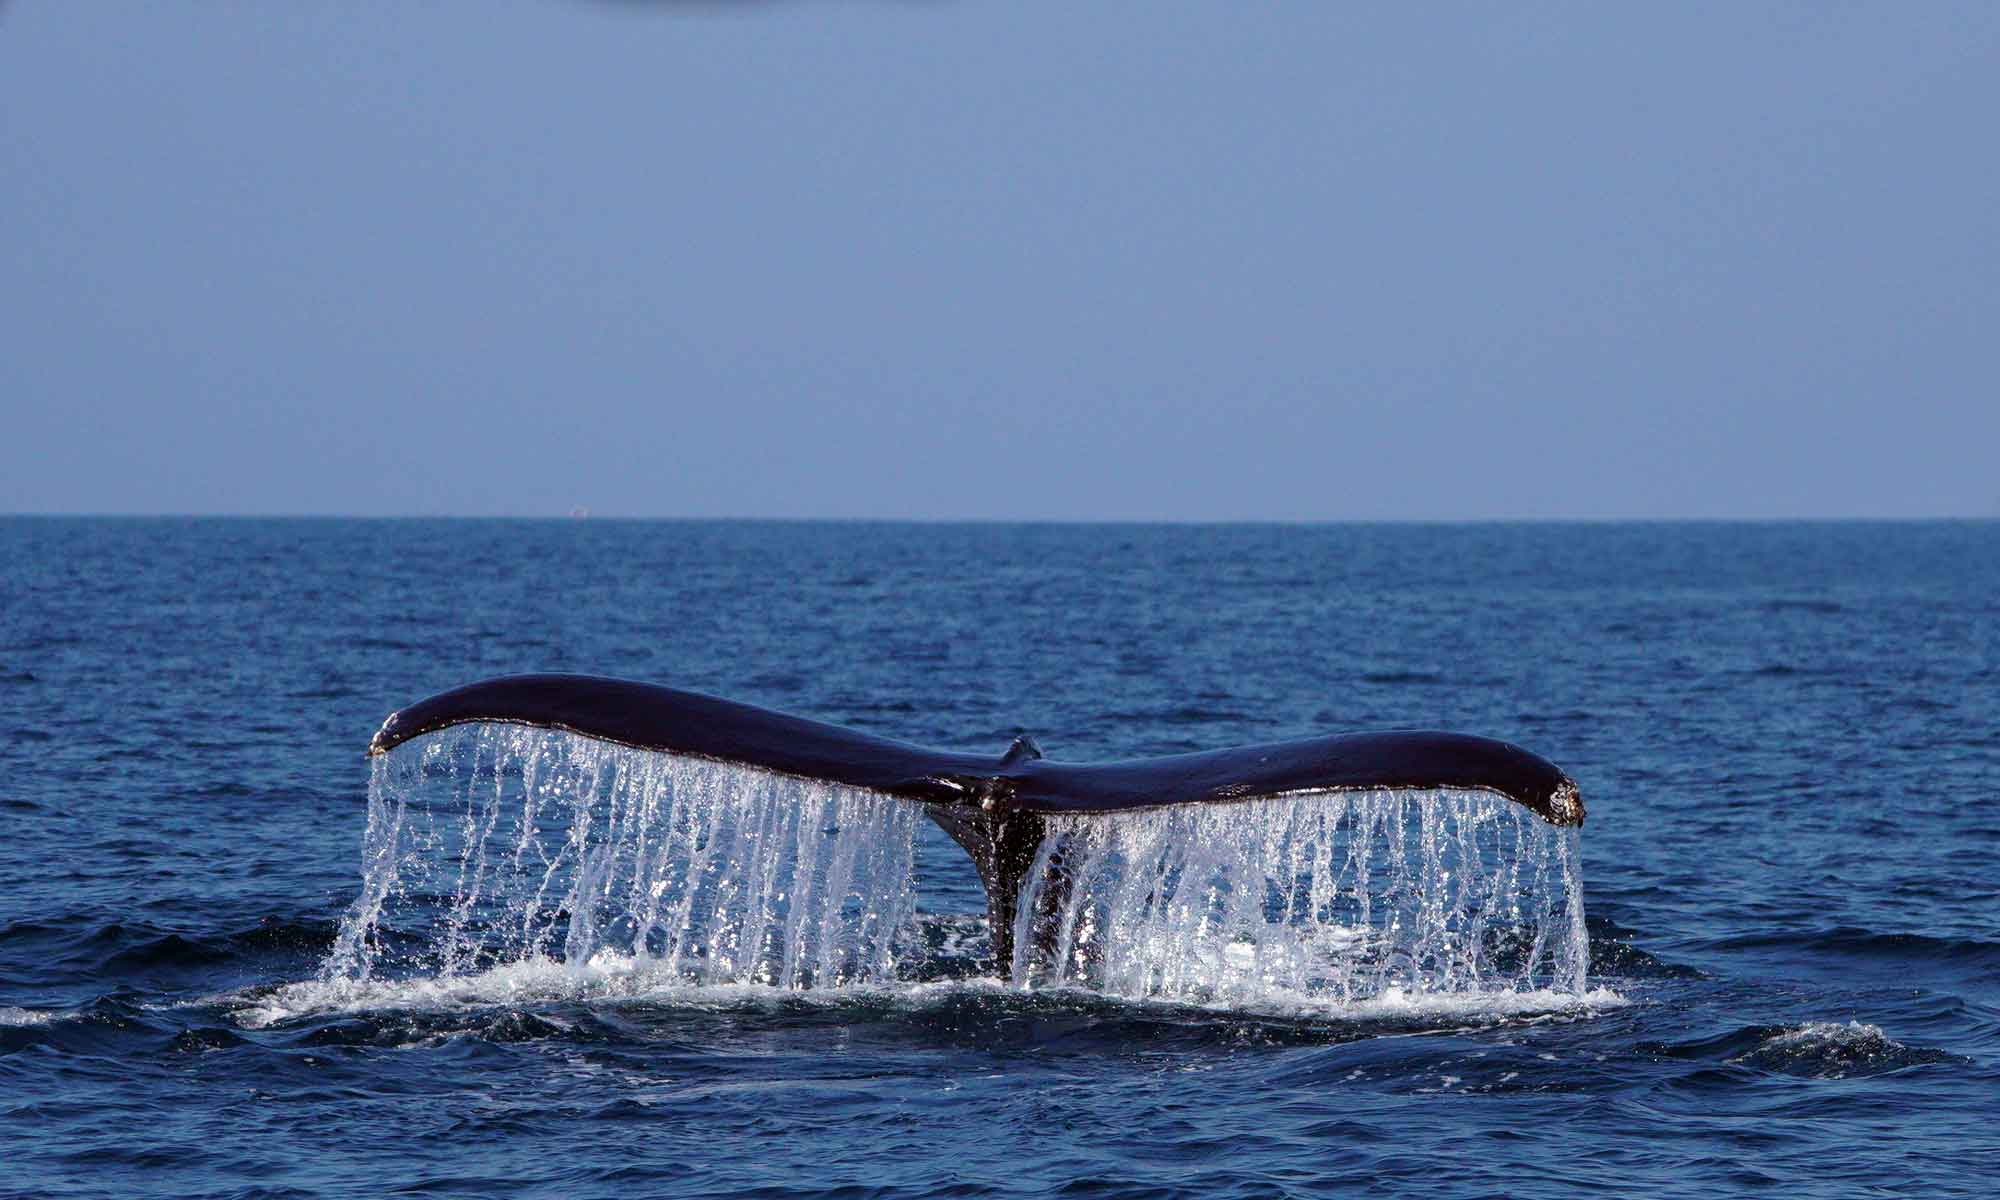 Humpback whales are rarely seen on dolphin and whale watching tours from Funchal, Madeira.